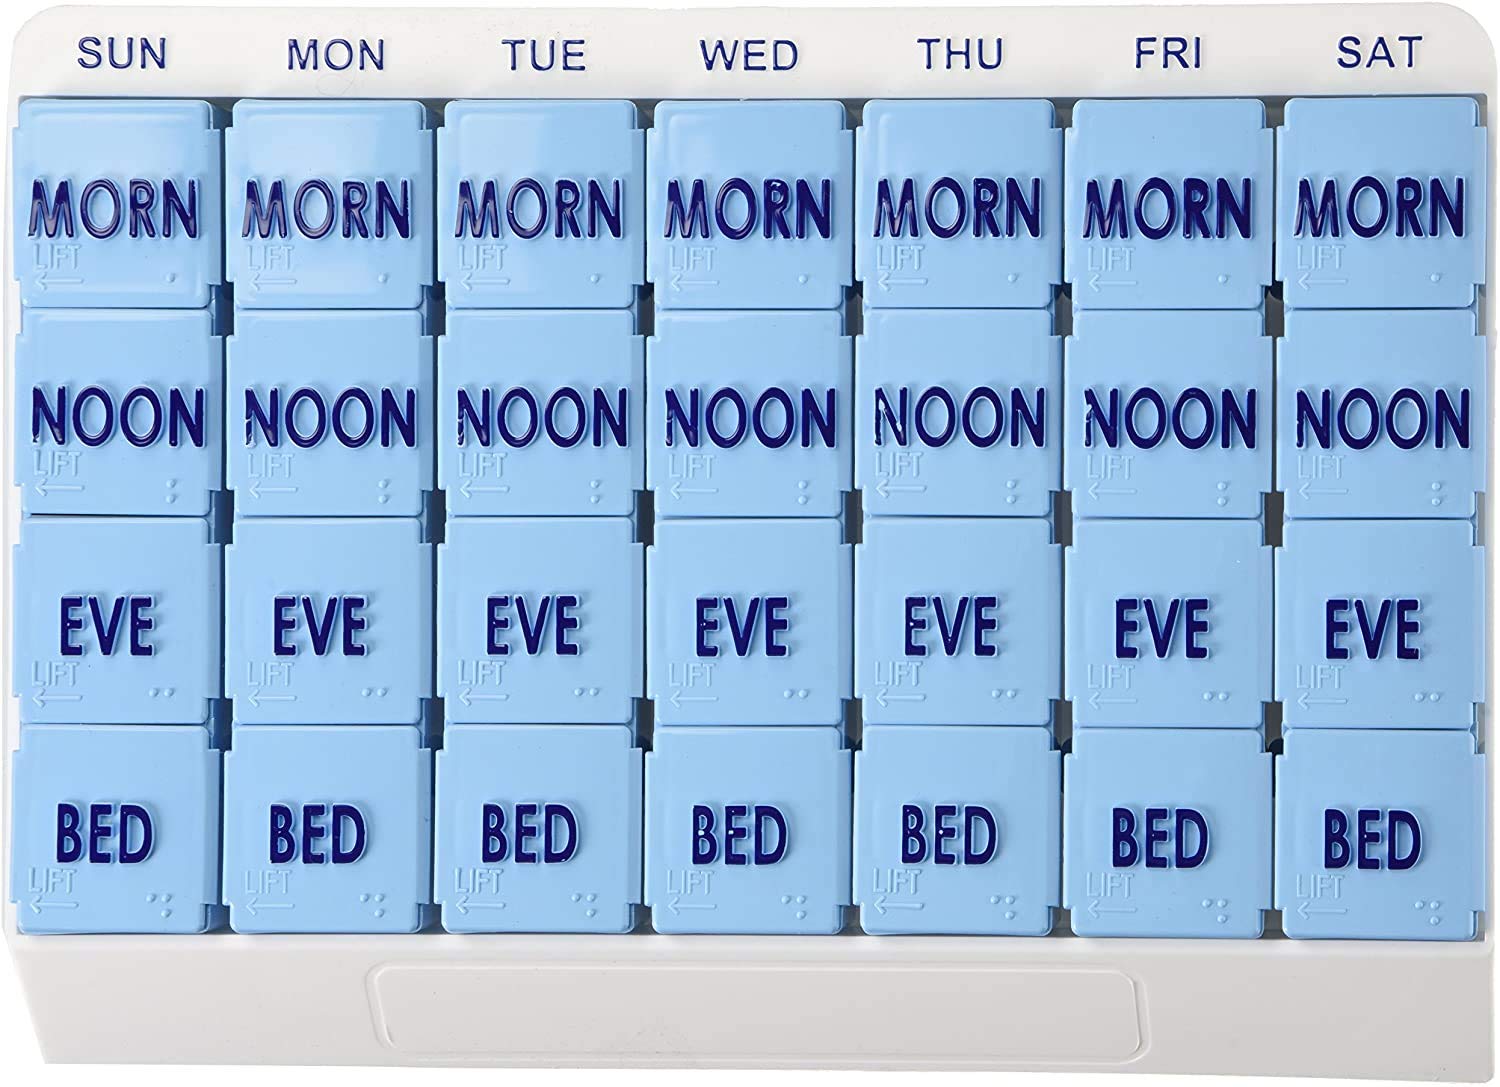 Apex Large 7 Day Weekly Pill Organizer - Weekly Pill Organizer, 4 Times a Day, Easy-Open, Organize Medication or Vitamins